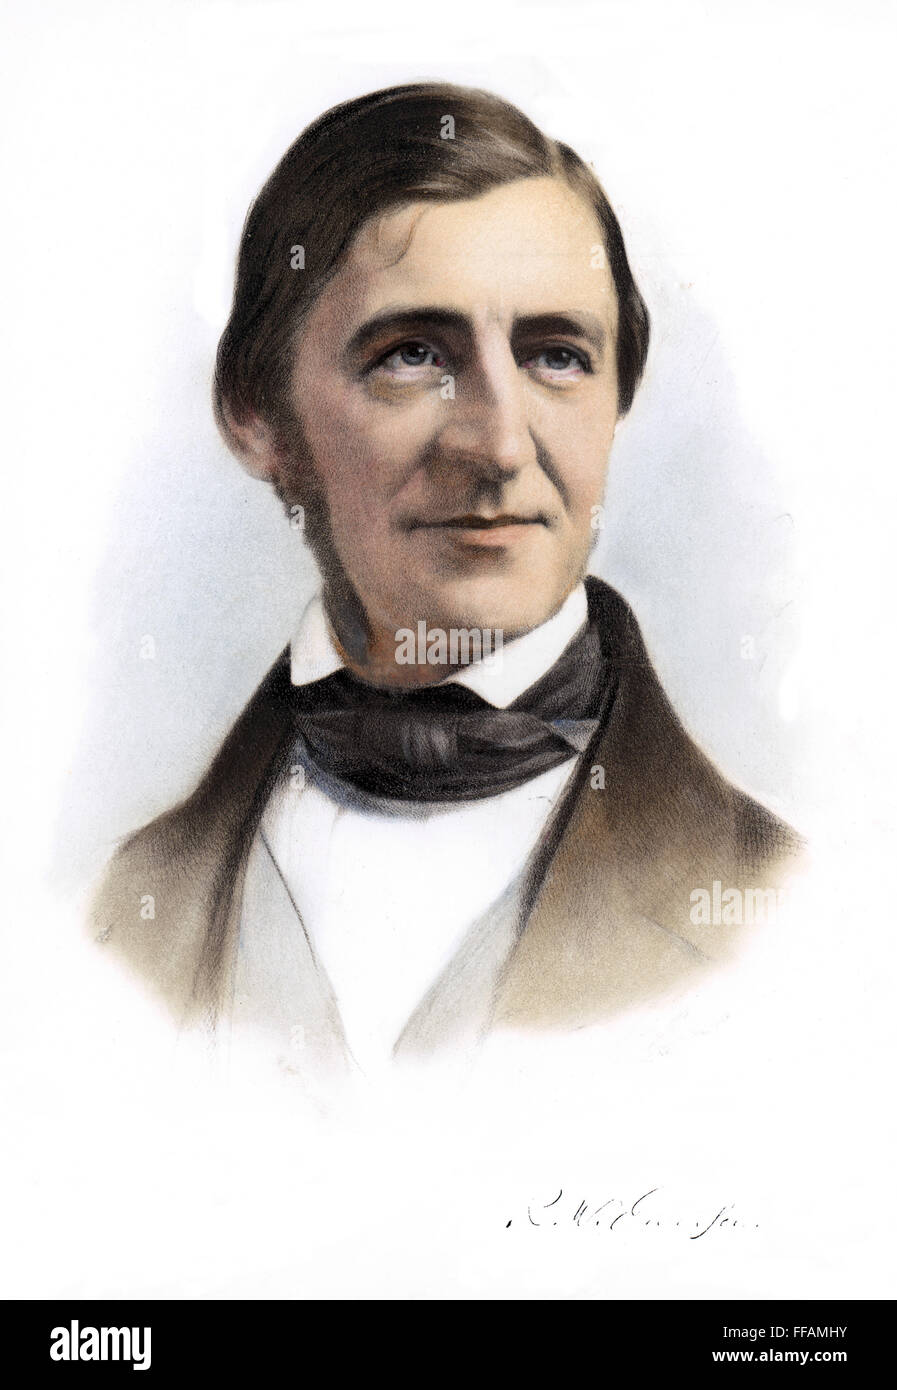 RALPH WALDO EMERSON /n(1803-1882). American philosopher and man of letters. Lithograph, American, 1859. Stock Photo